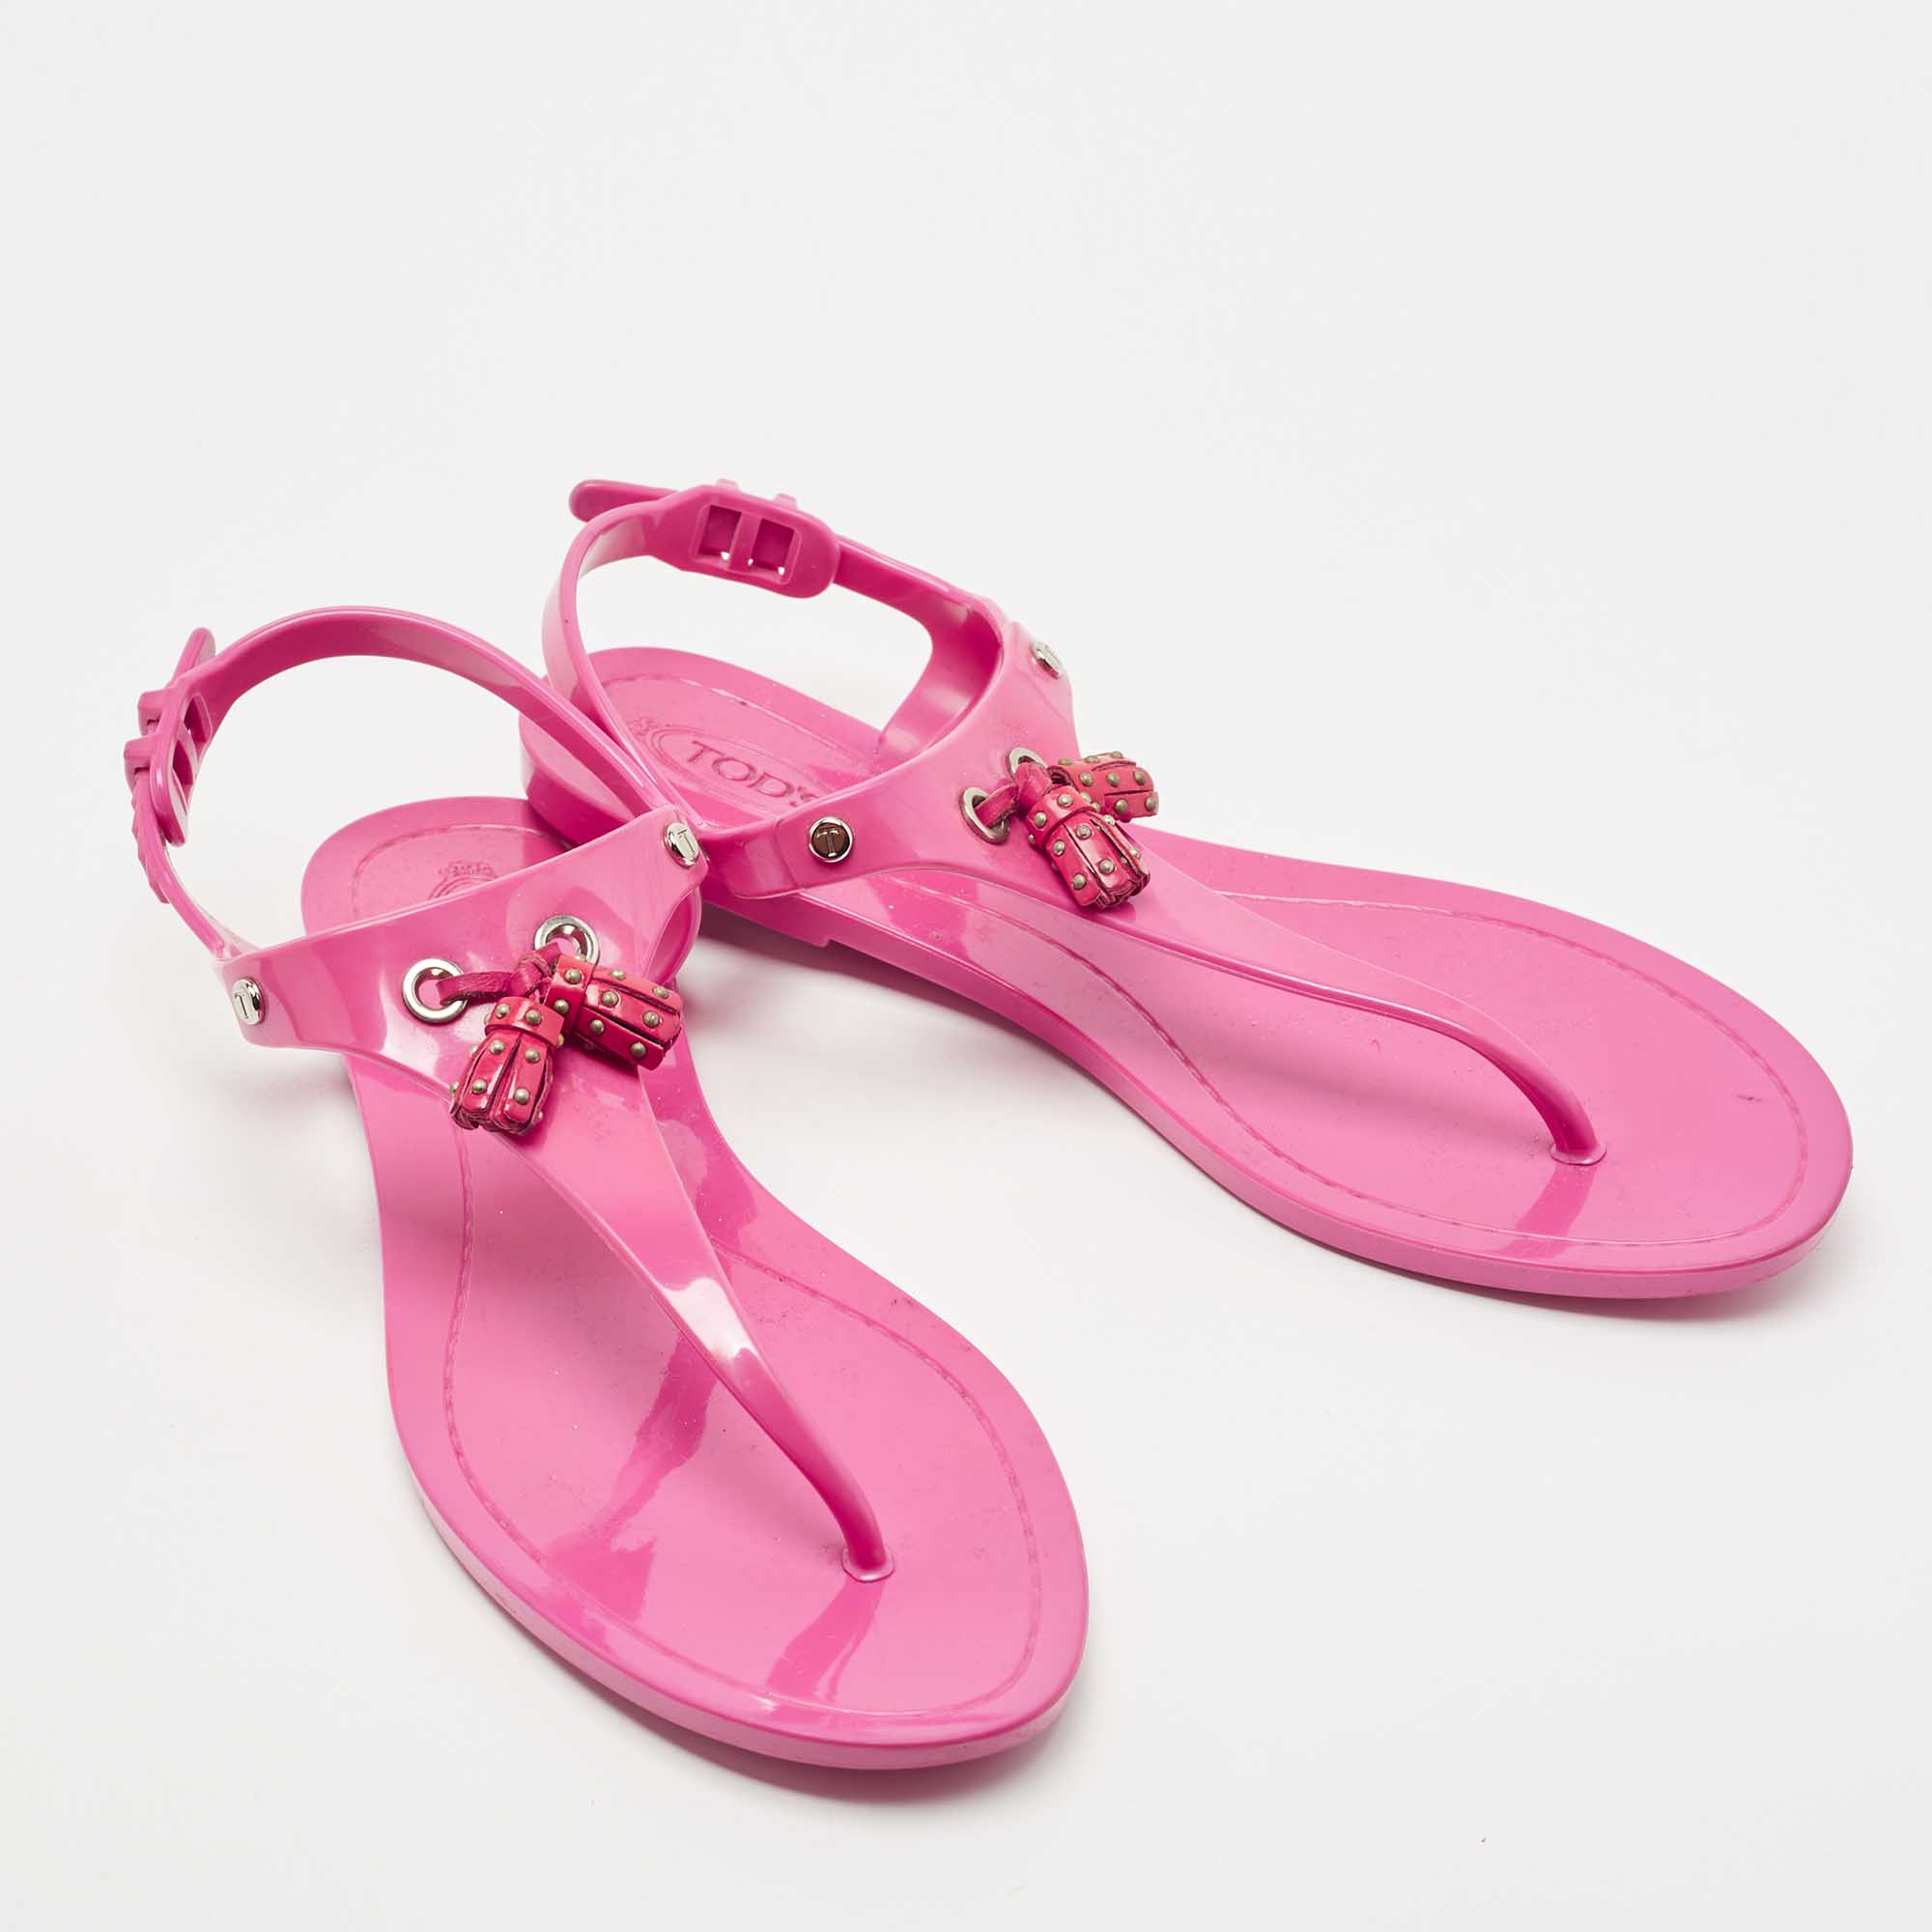 Tod's Pink Rubber Studded Tassel Thong Flat Sandals Size 38